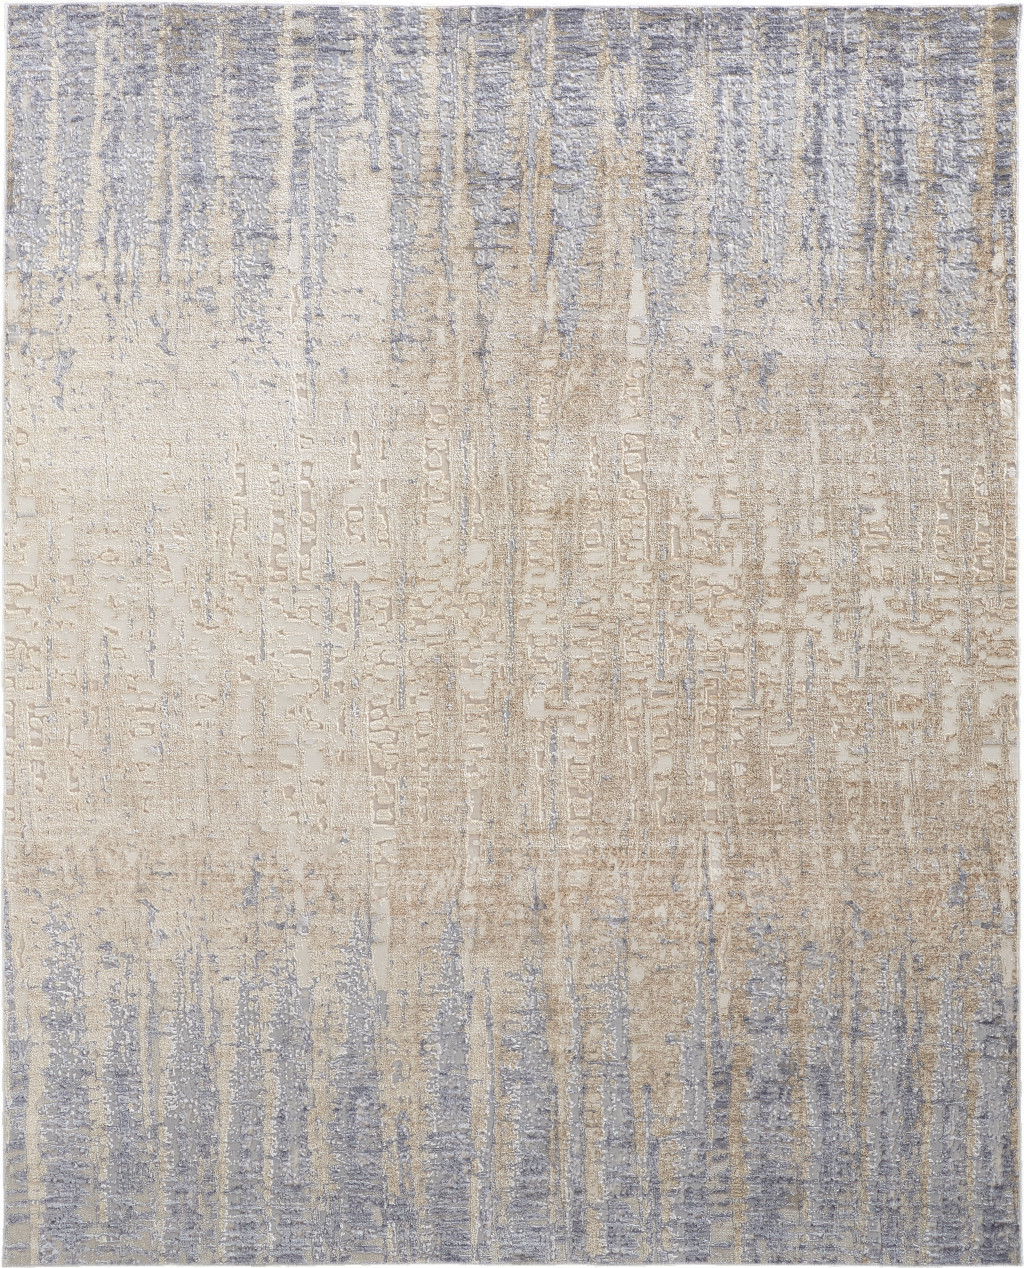 12' X 15' Tan Brown And Blue Abstract Power Loom Distressed Area Rug-514192-1